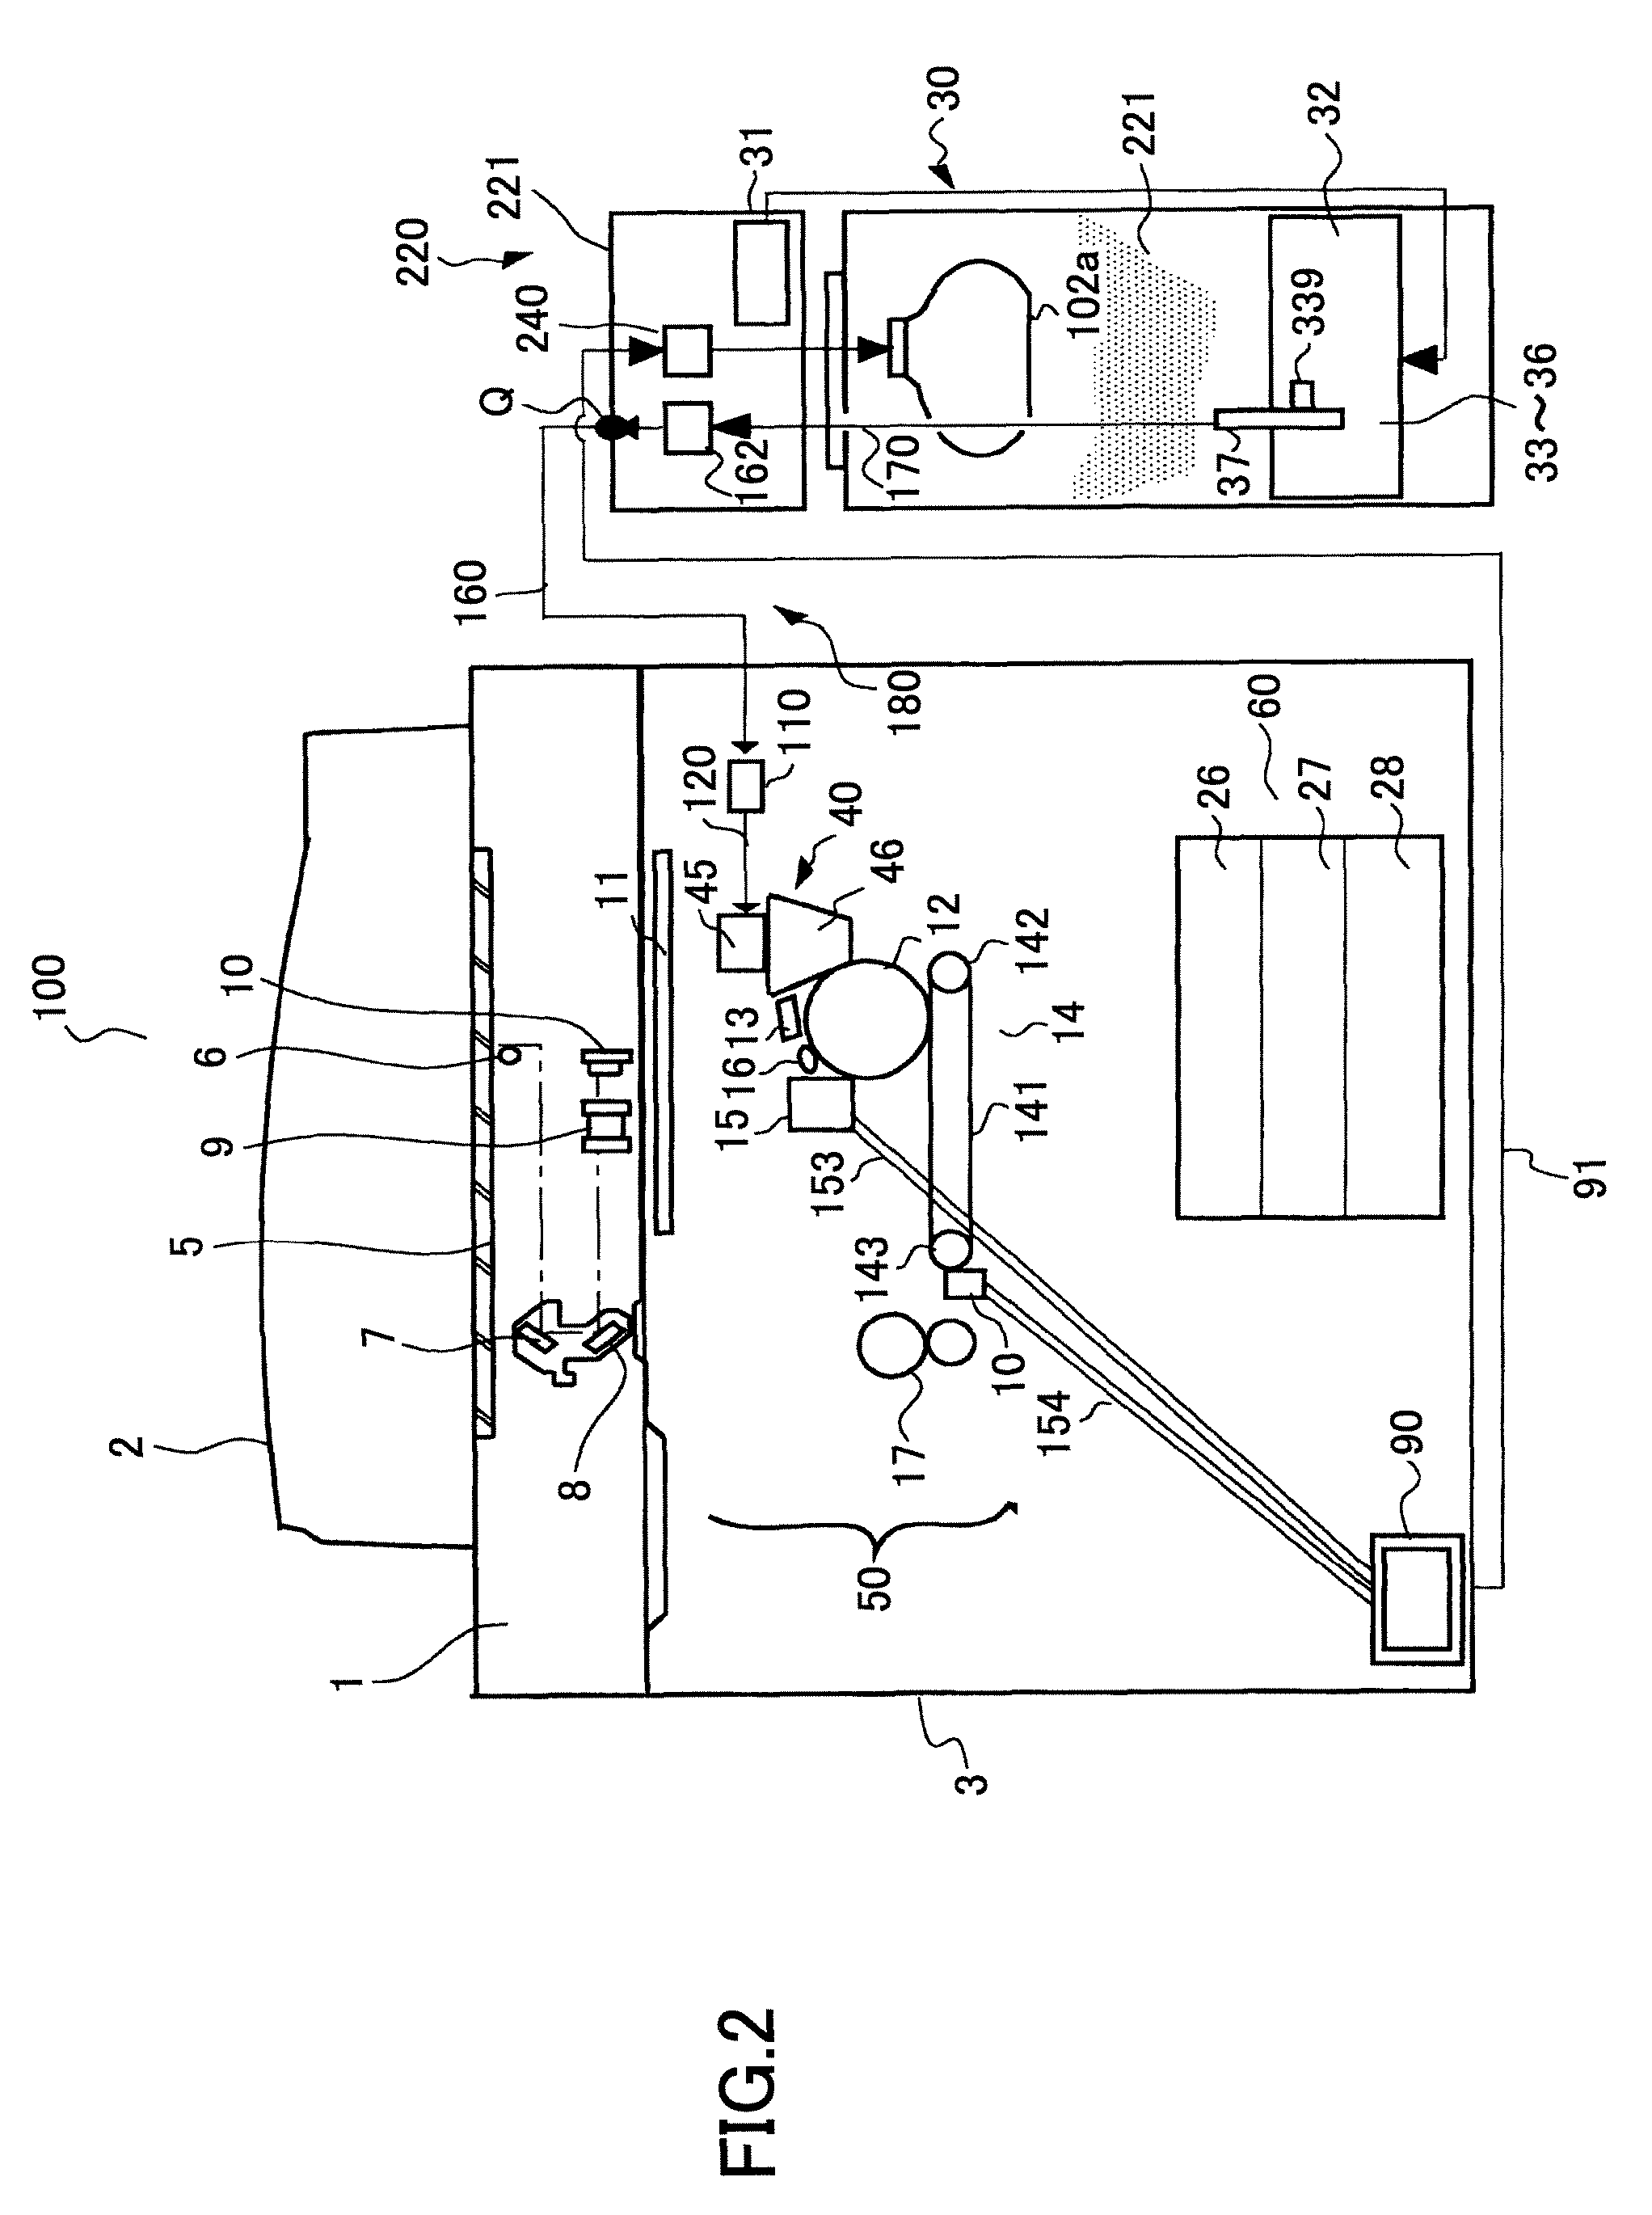 Image forming device, powder supply device, and powder storing unit including a gas supplying unit